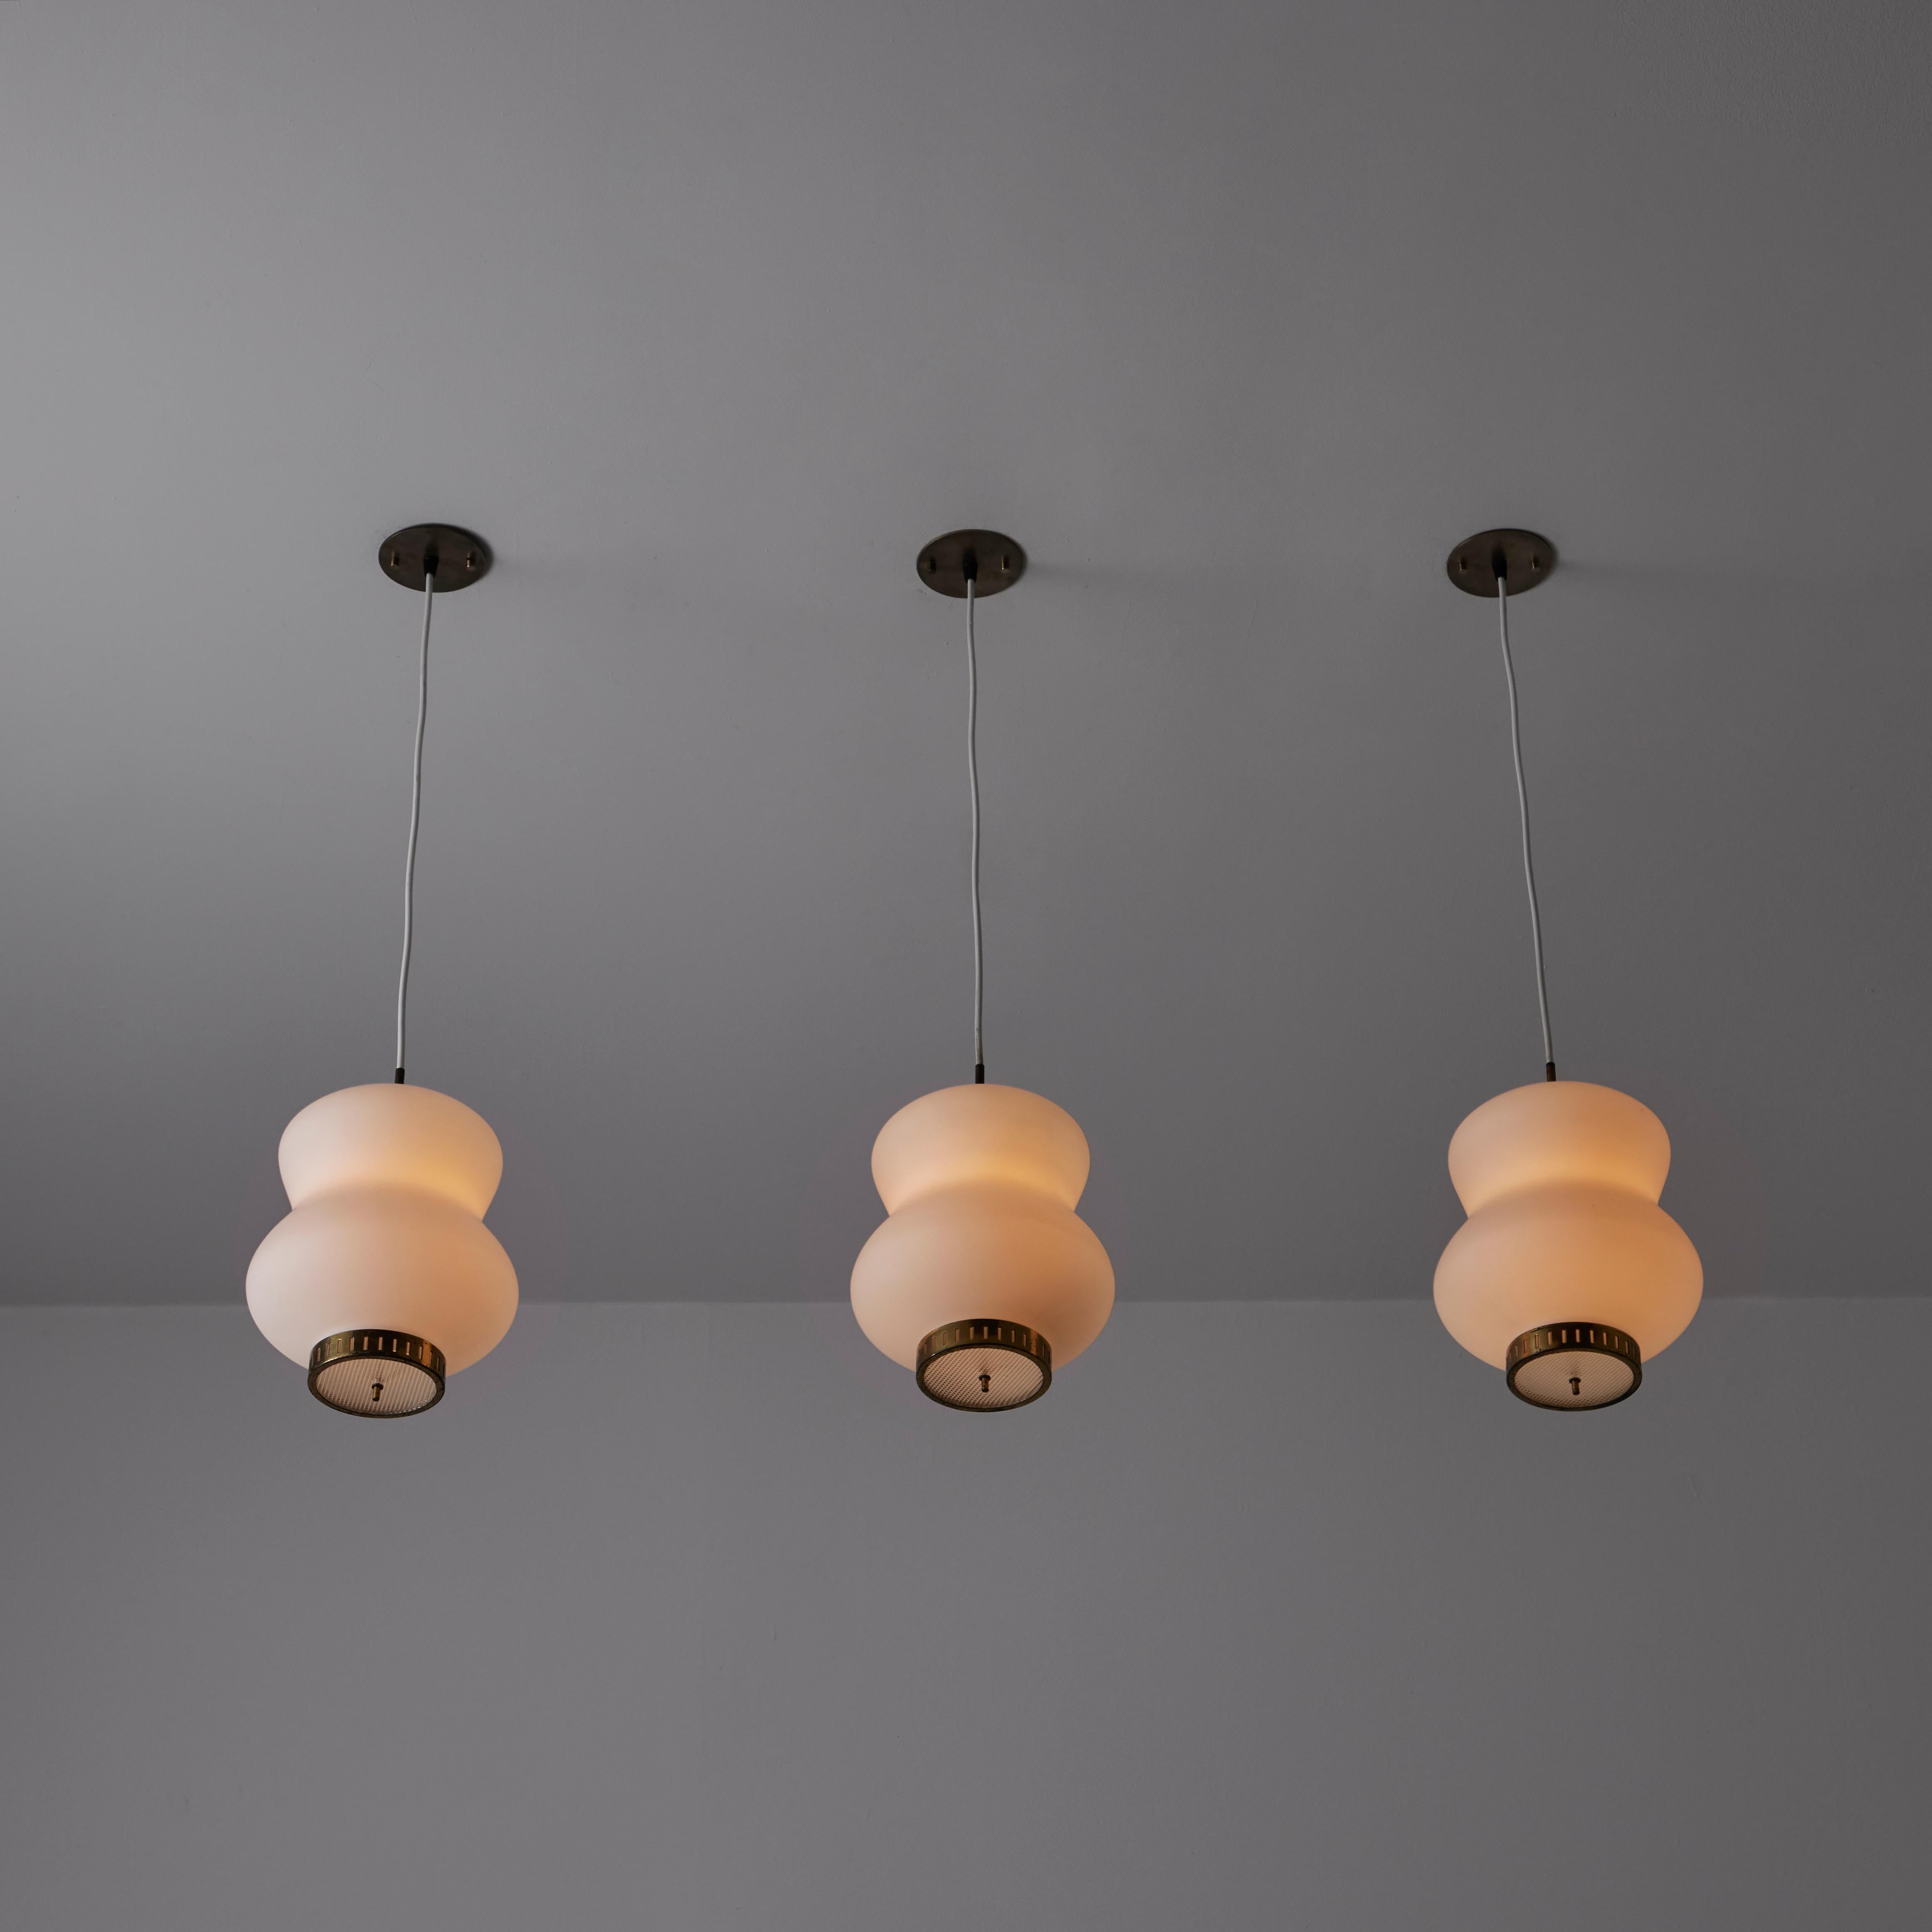 Suspension ceiling light by Stilnovo. Designed and manufactured in Italy, circa the 1960s. A trio of bentwood armatures hoists three large blown opal glass bodies. The main glass shades are sandblasted opal white, paired with a reeded glass bottom